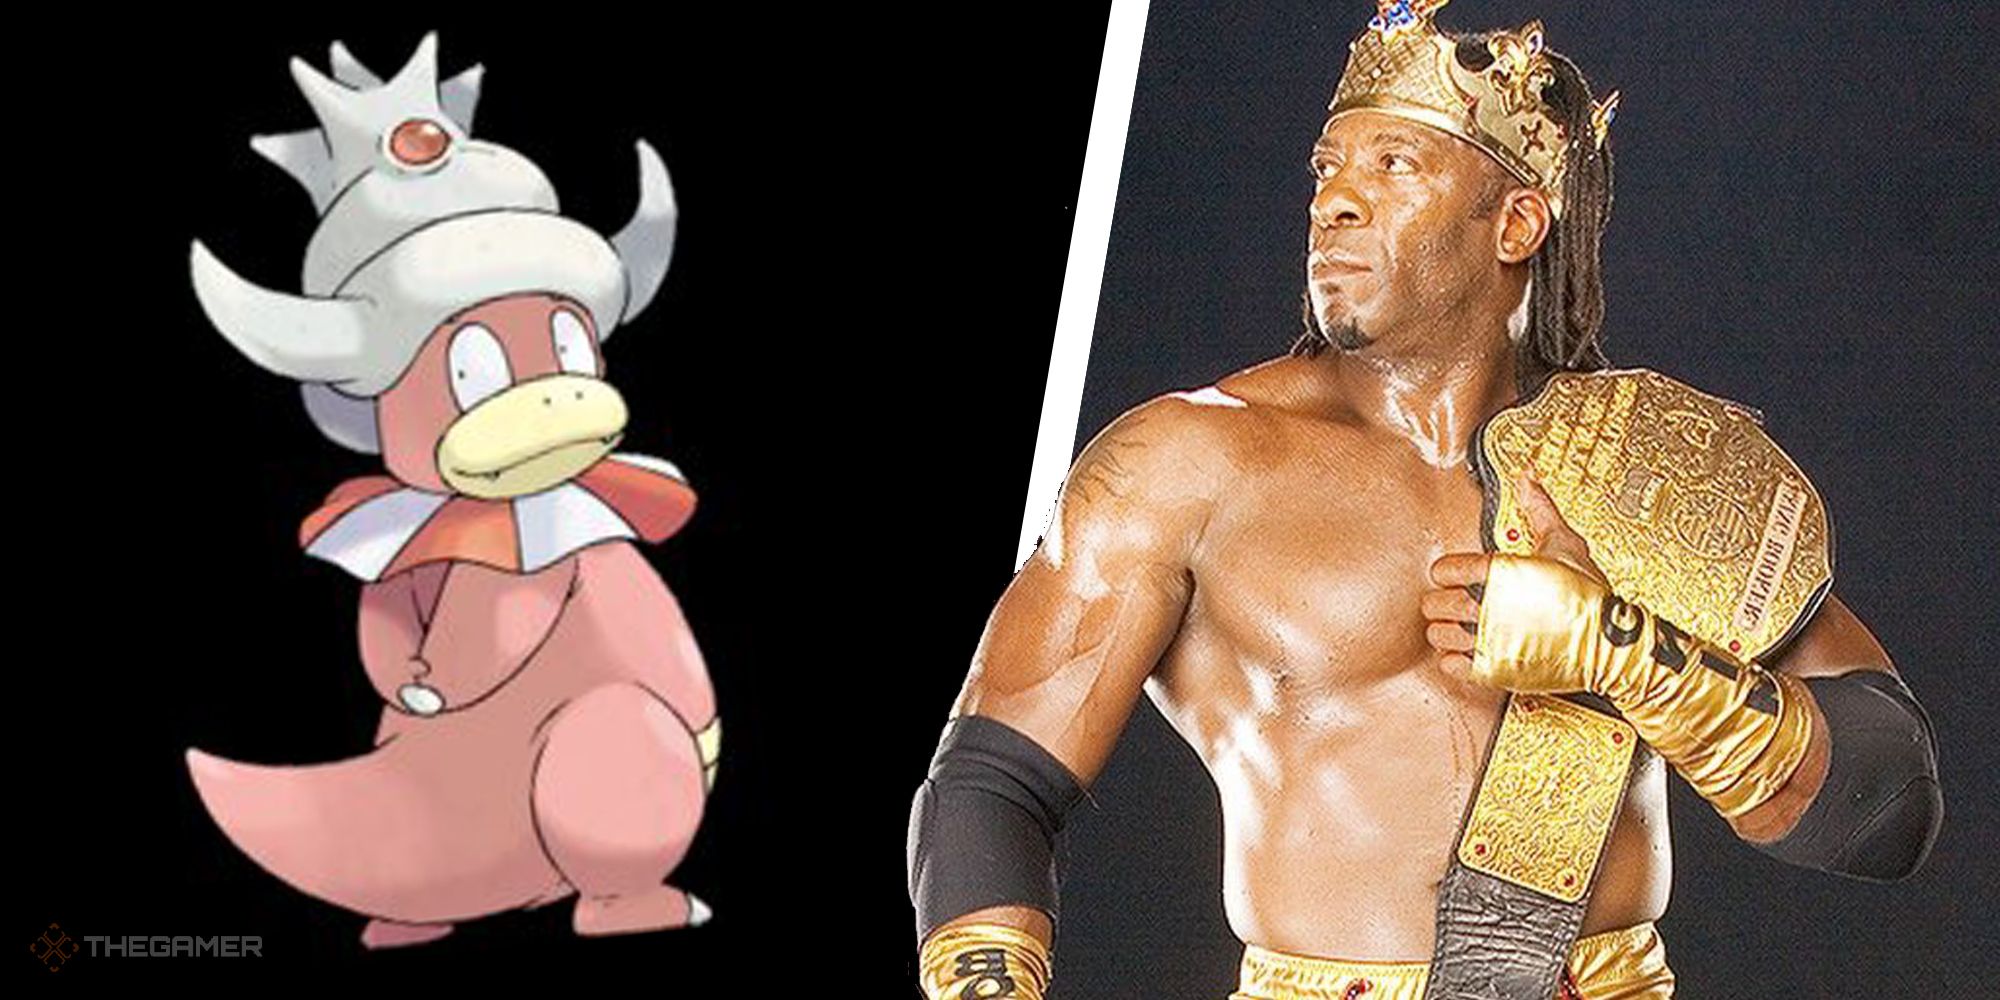 Heres 30 Wrestlers As Pokemon For The Royal Rumble (3)